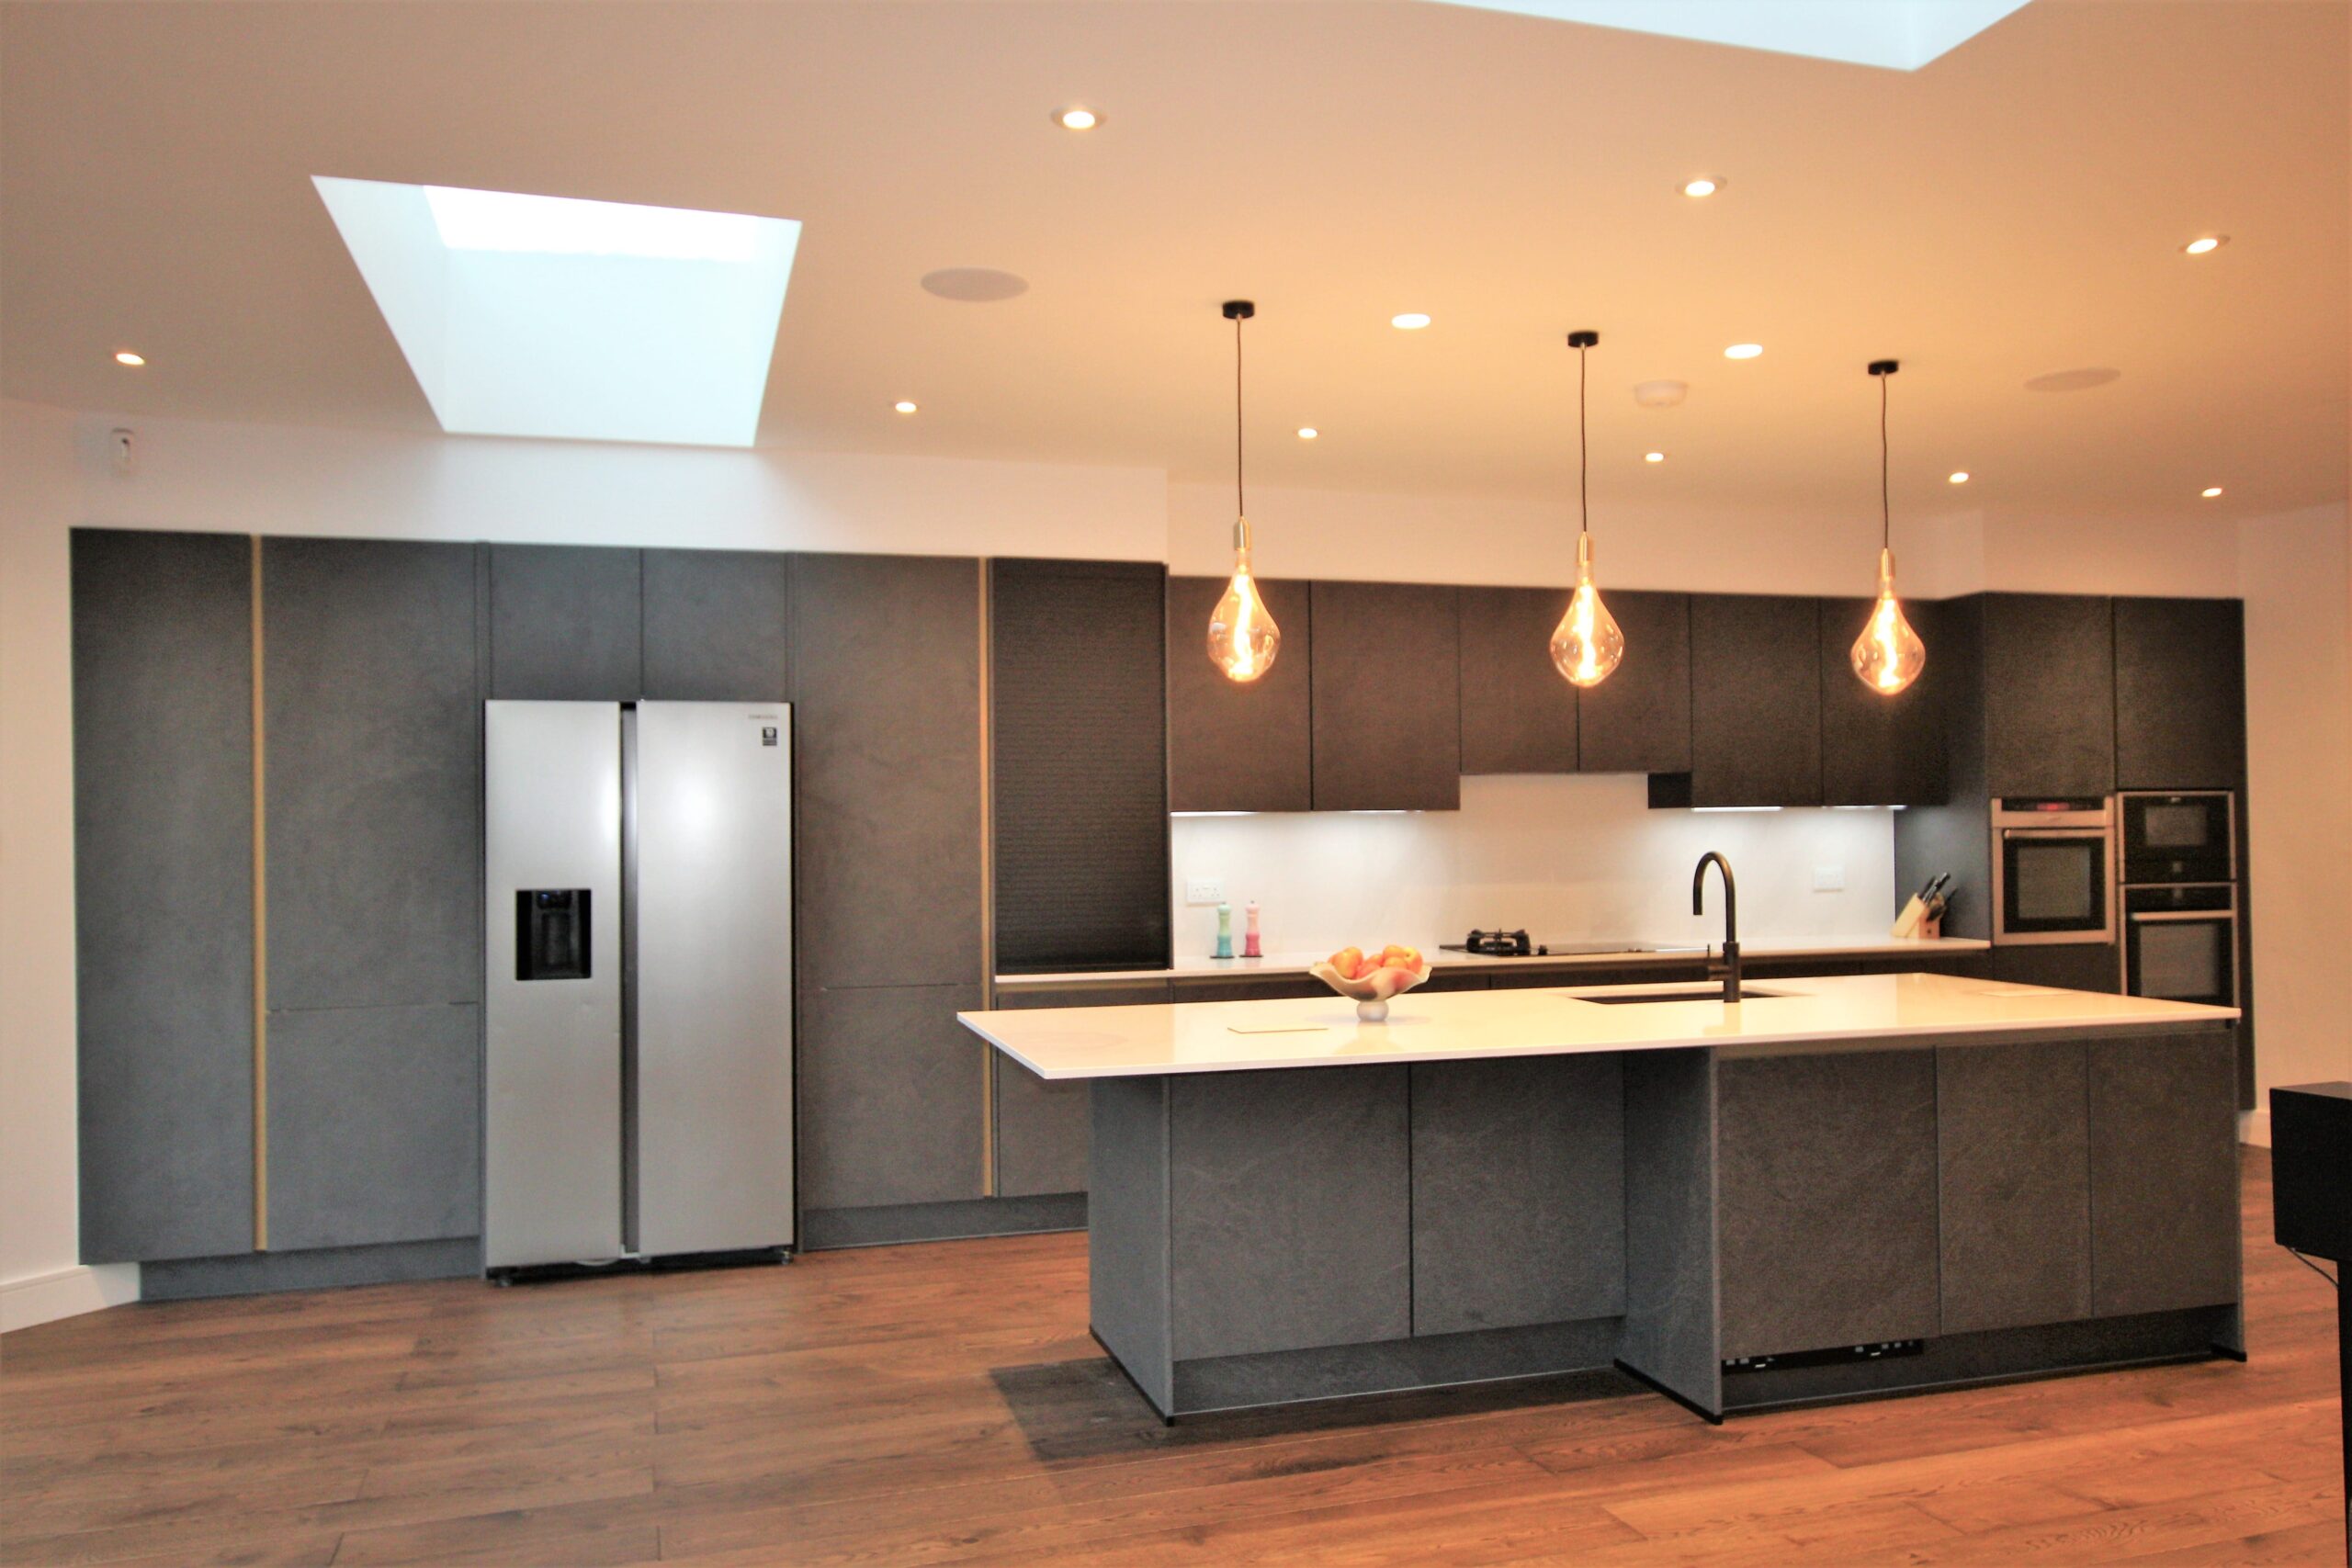 Nobilia German kitchen designed, supplied and installed by Hampdens KB